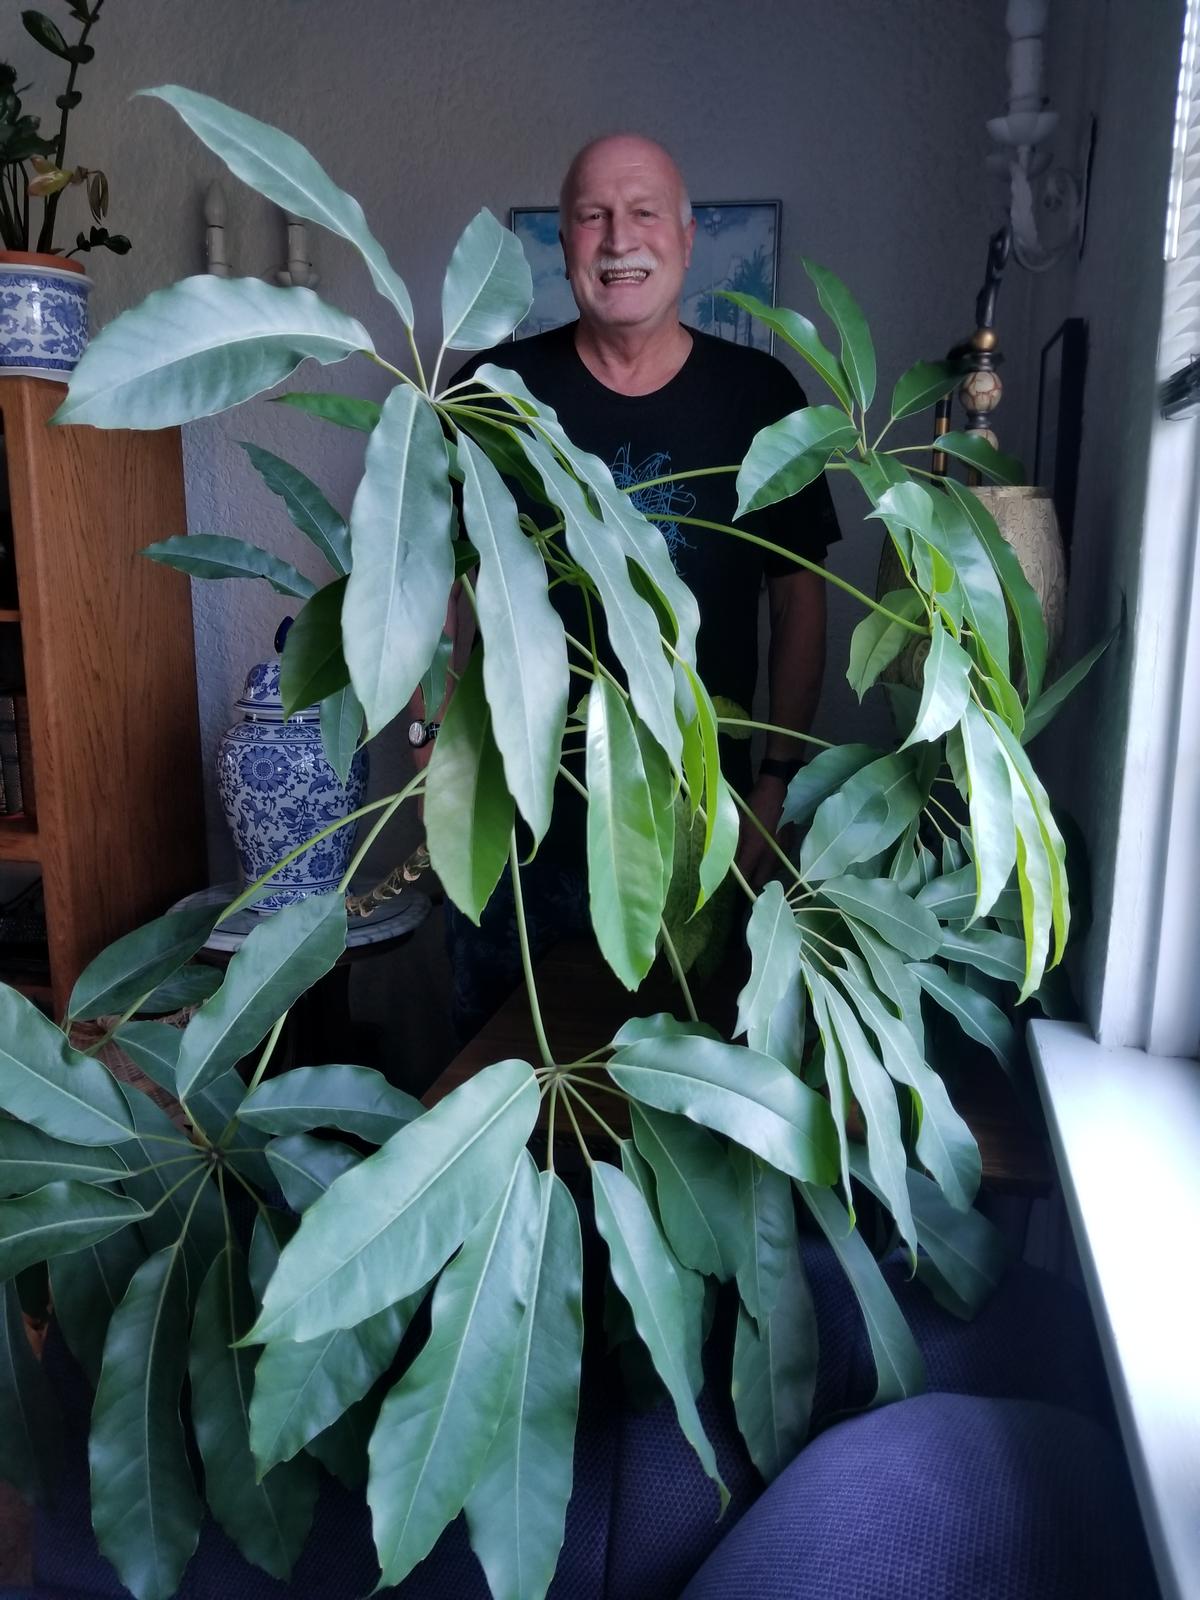 a man stands behind a humongous, broad-leafed plant that is as tall as him